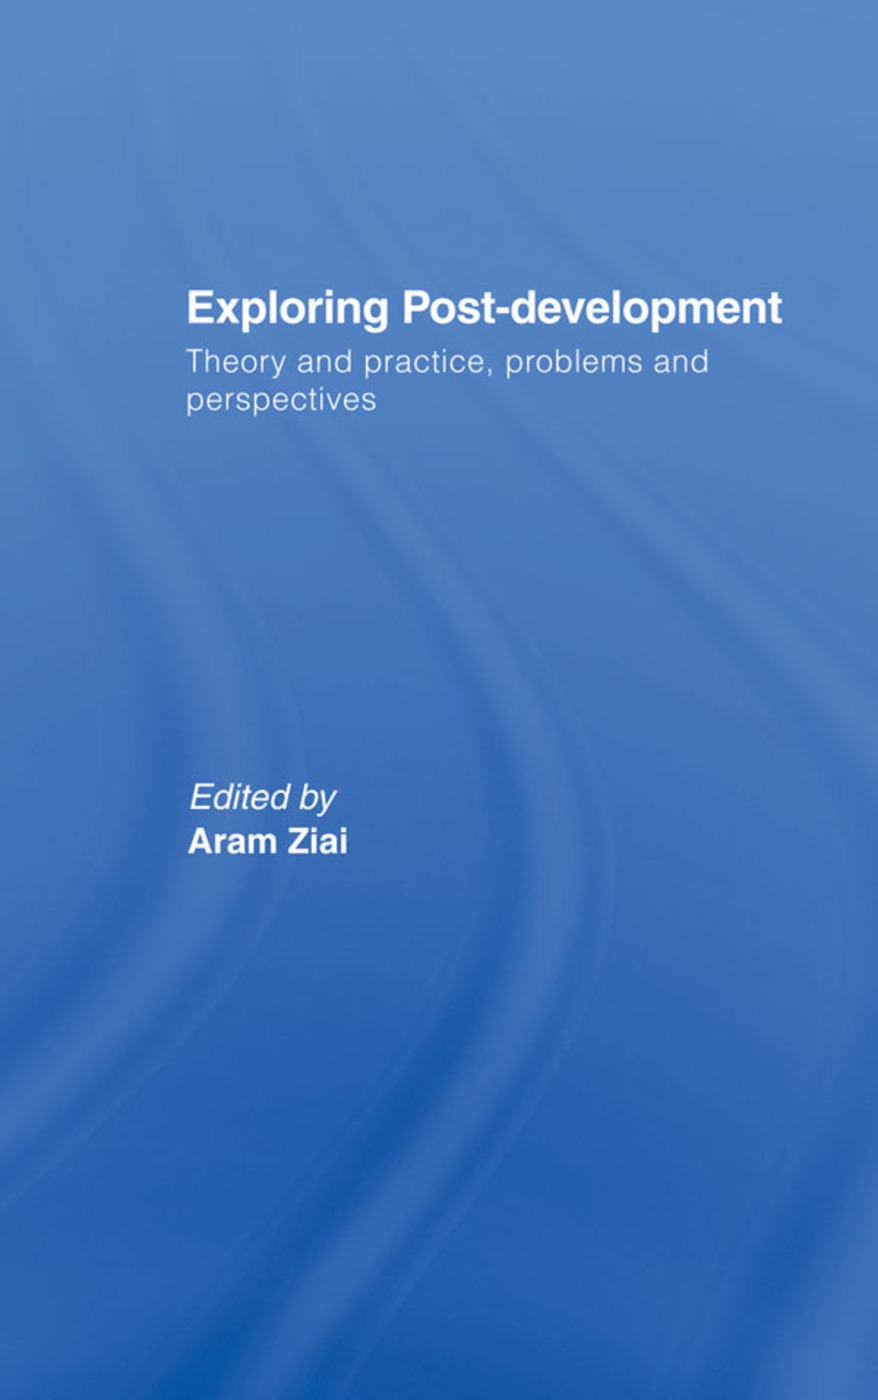 Exploring Post-Development: Theory and Practice, Problems and Perspectives